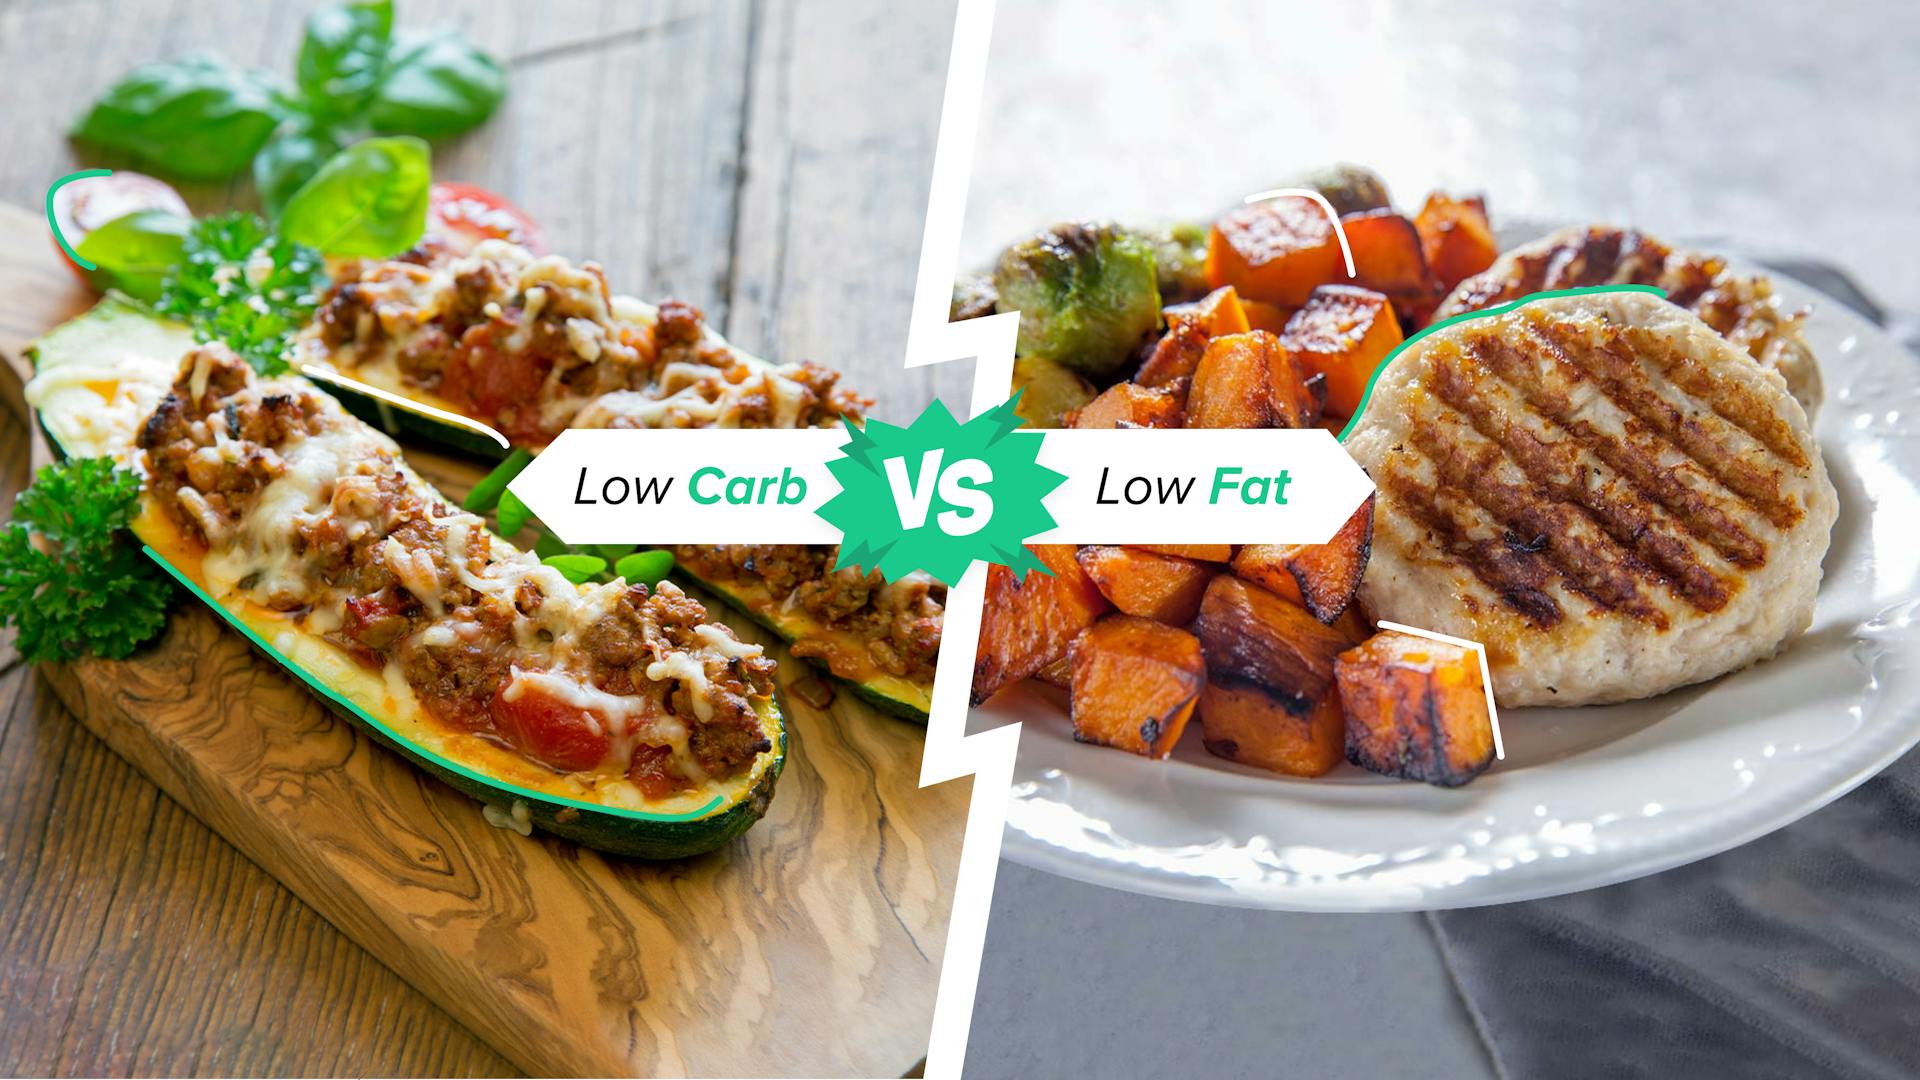 Low Carb VS. Low Fat: What the Science Says